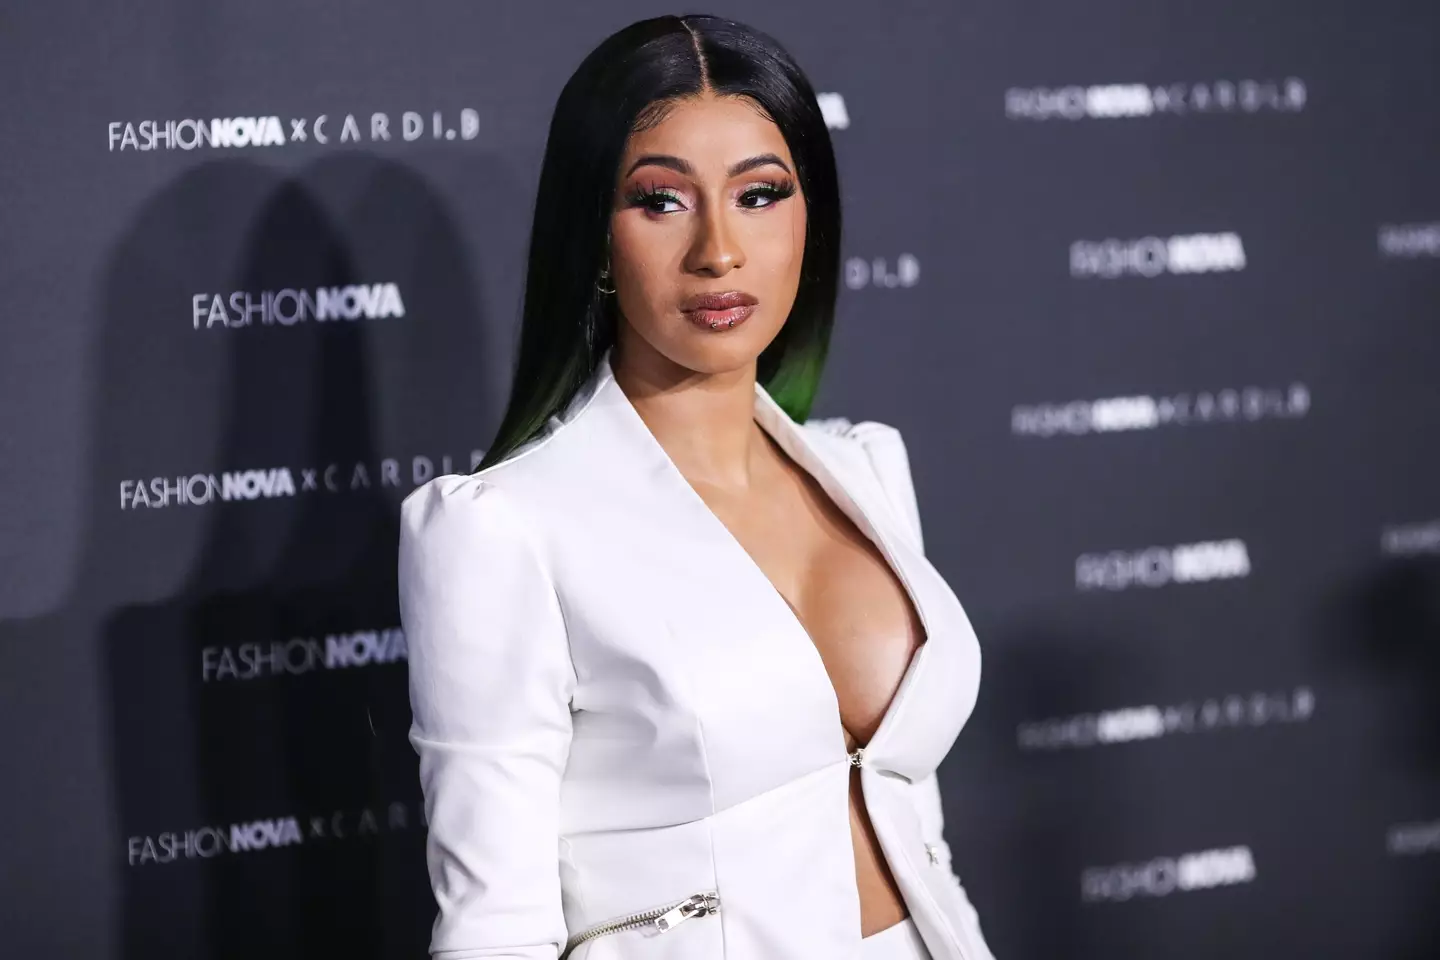 Cardi B is in third place.